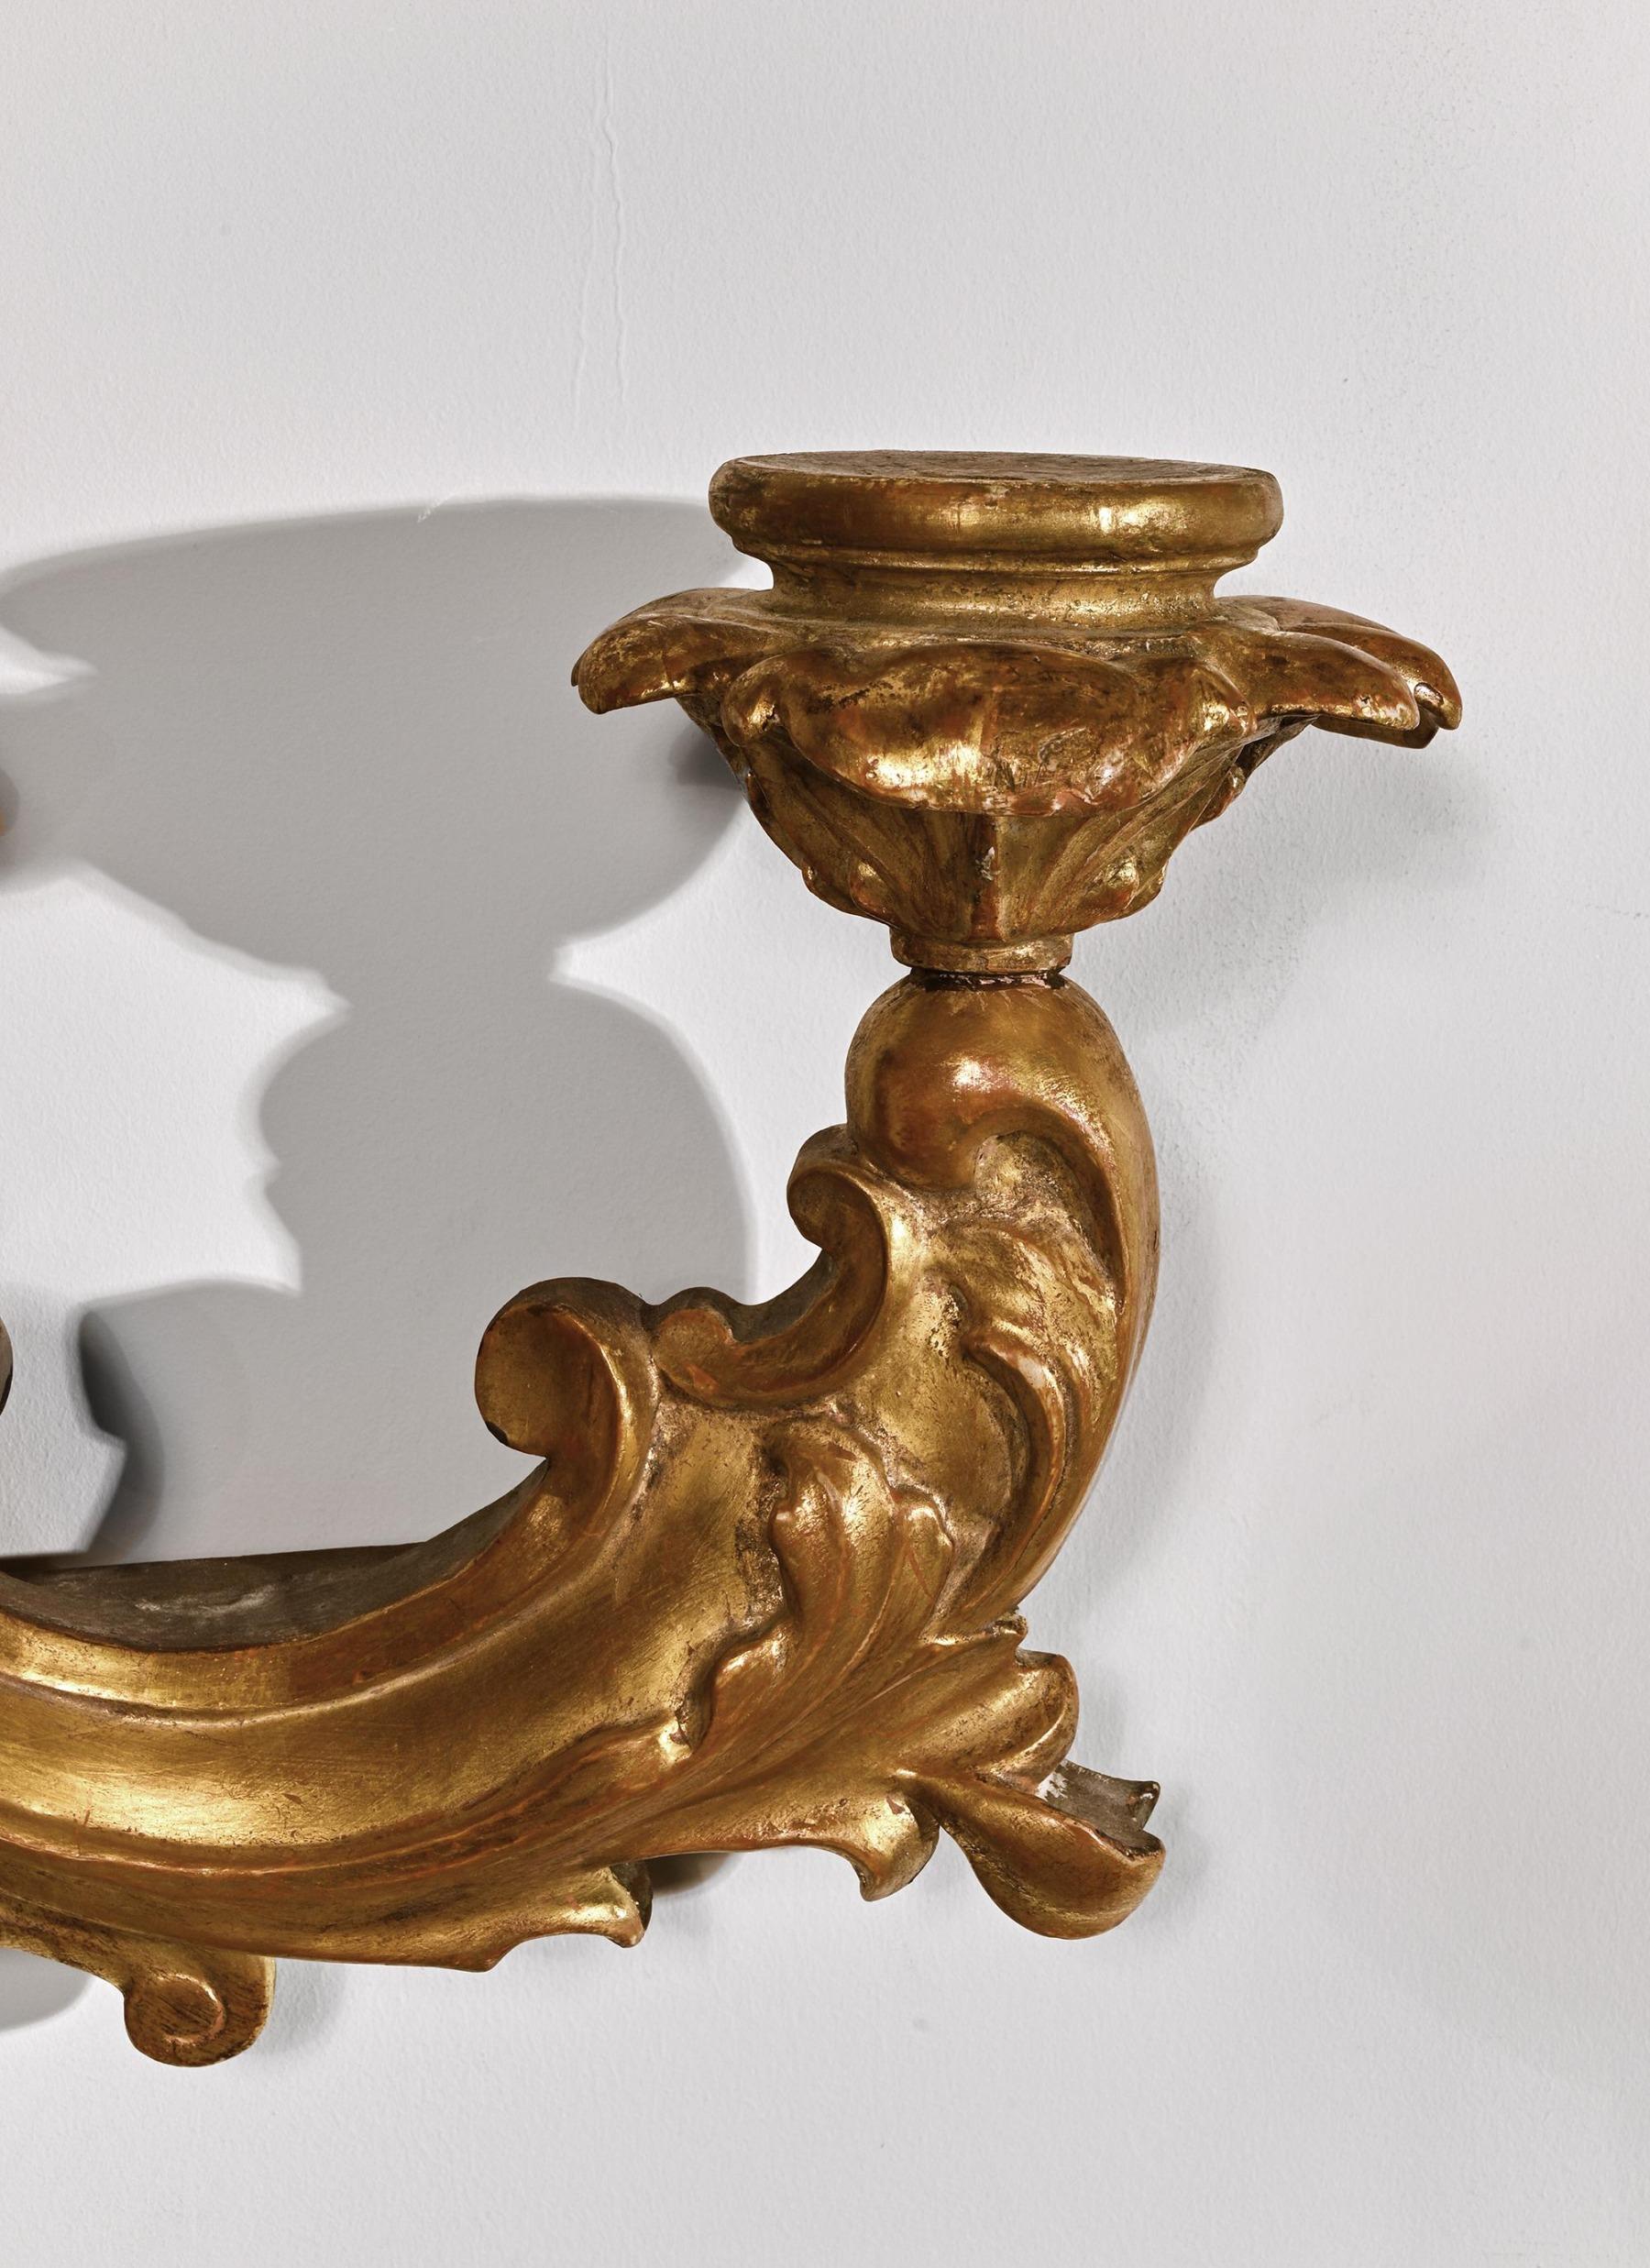 Pair of 18th Century Venetian Giltwood Wall Sconces In Good Condition For Sale In Benington, Herts